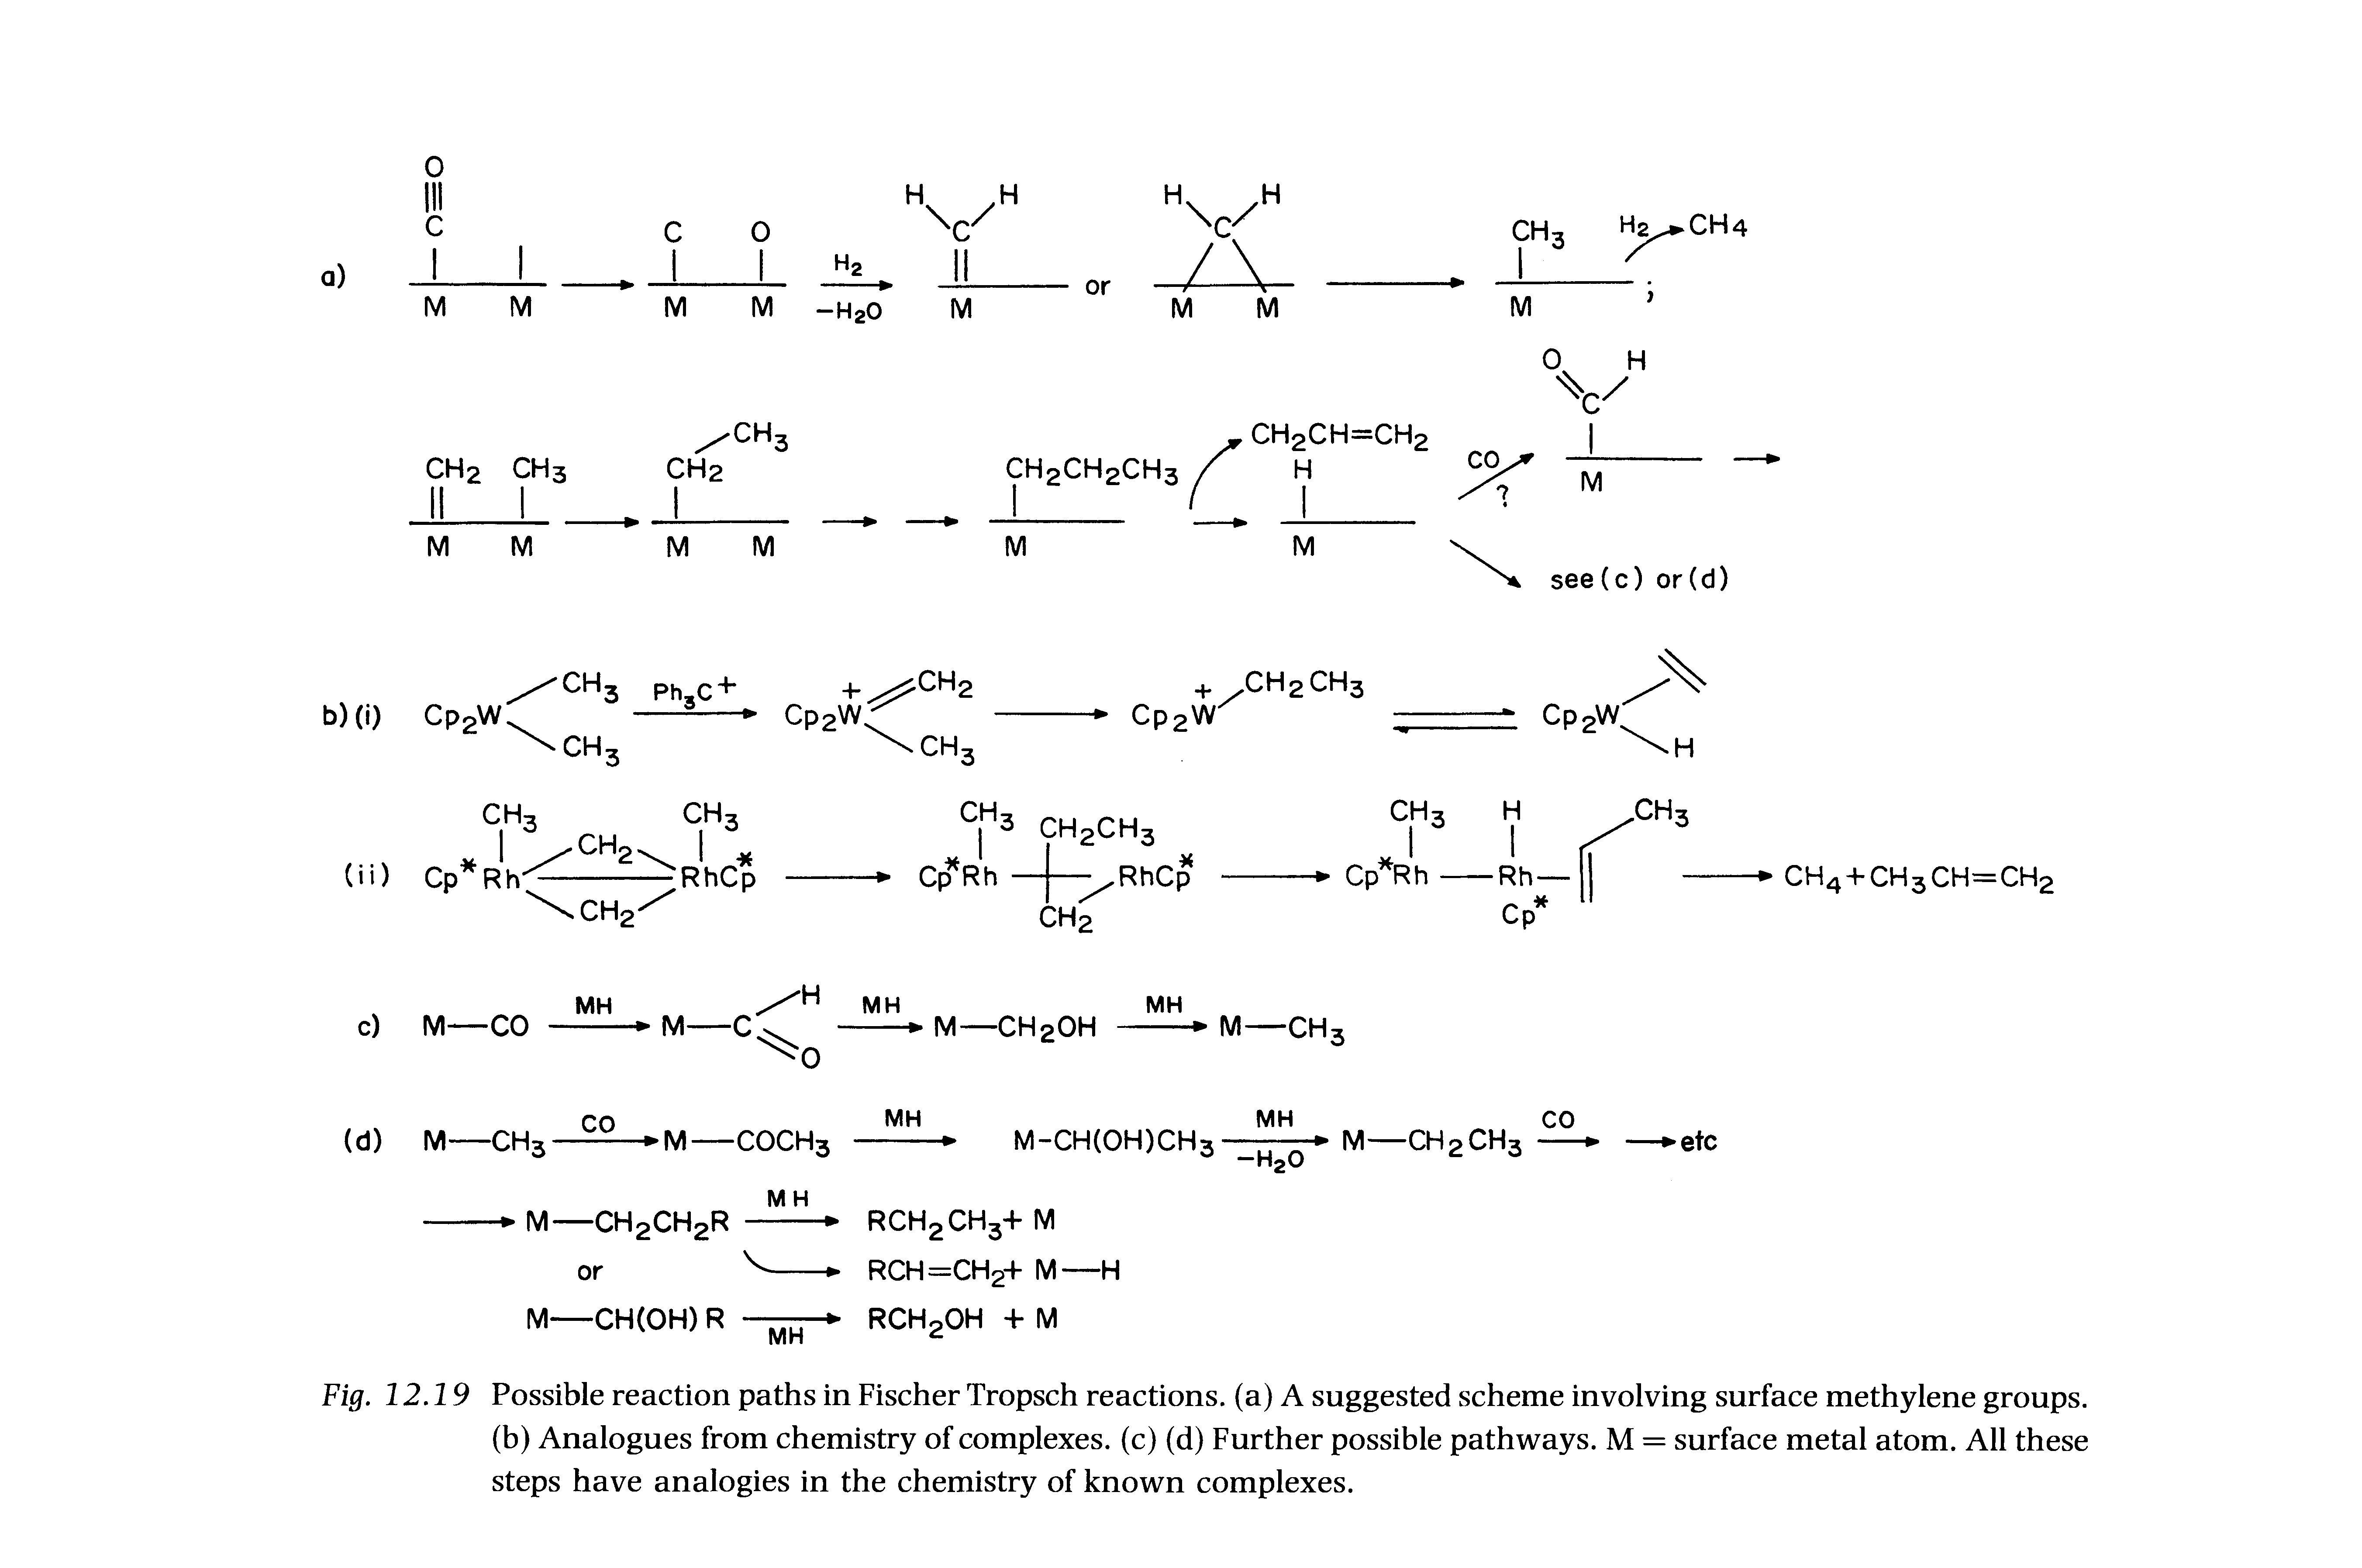 Fig. 12.19 Possible reaction paths in Fischer Tropsch reactions, (a) A suggested scheme involving surface methylene groups.